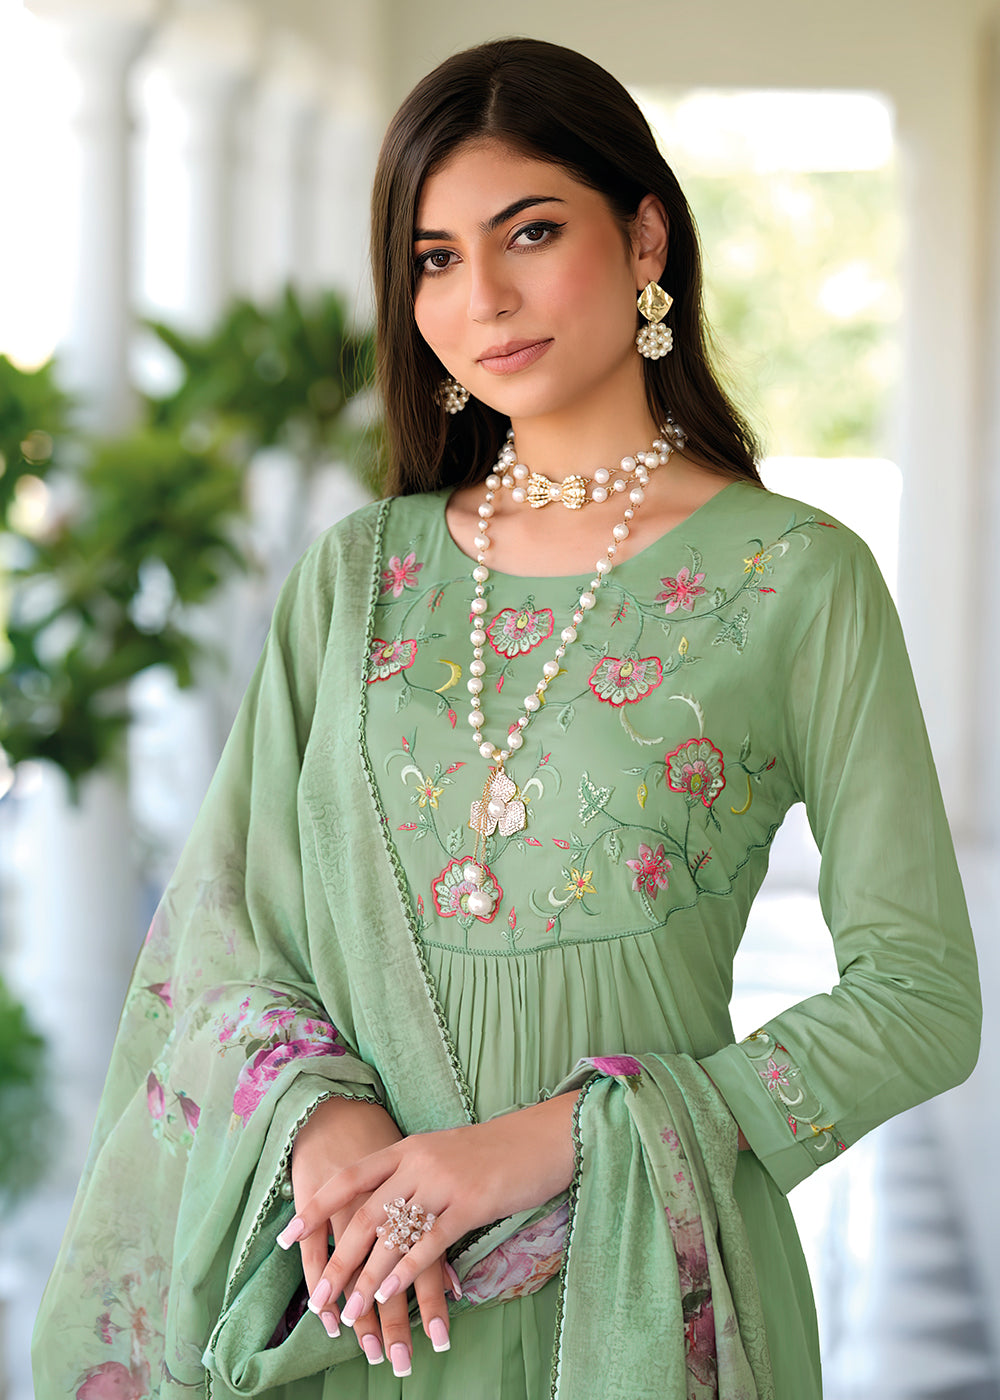 Buy Now Graceful Green Mal Mal Cotton Salwar Suit Online in USA, UK, Canada, Germany, Australia & Worldwide at Empress Clothing.